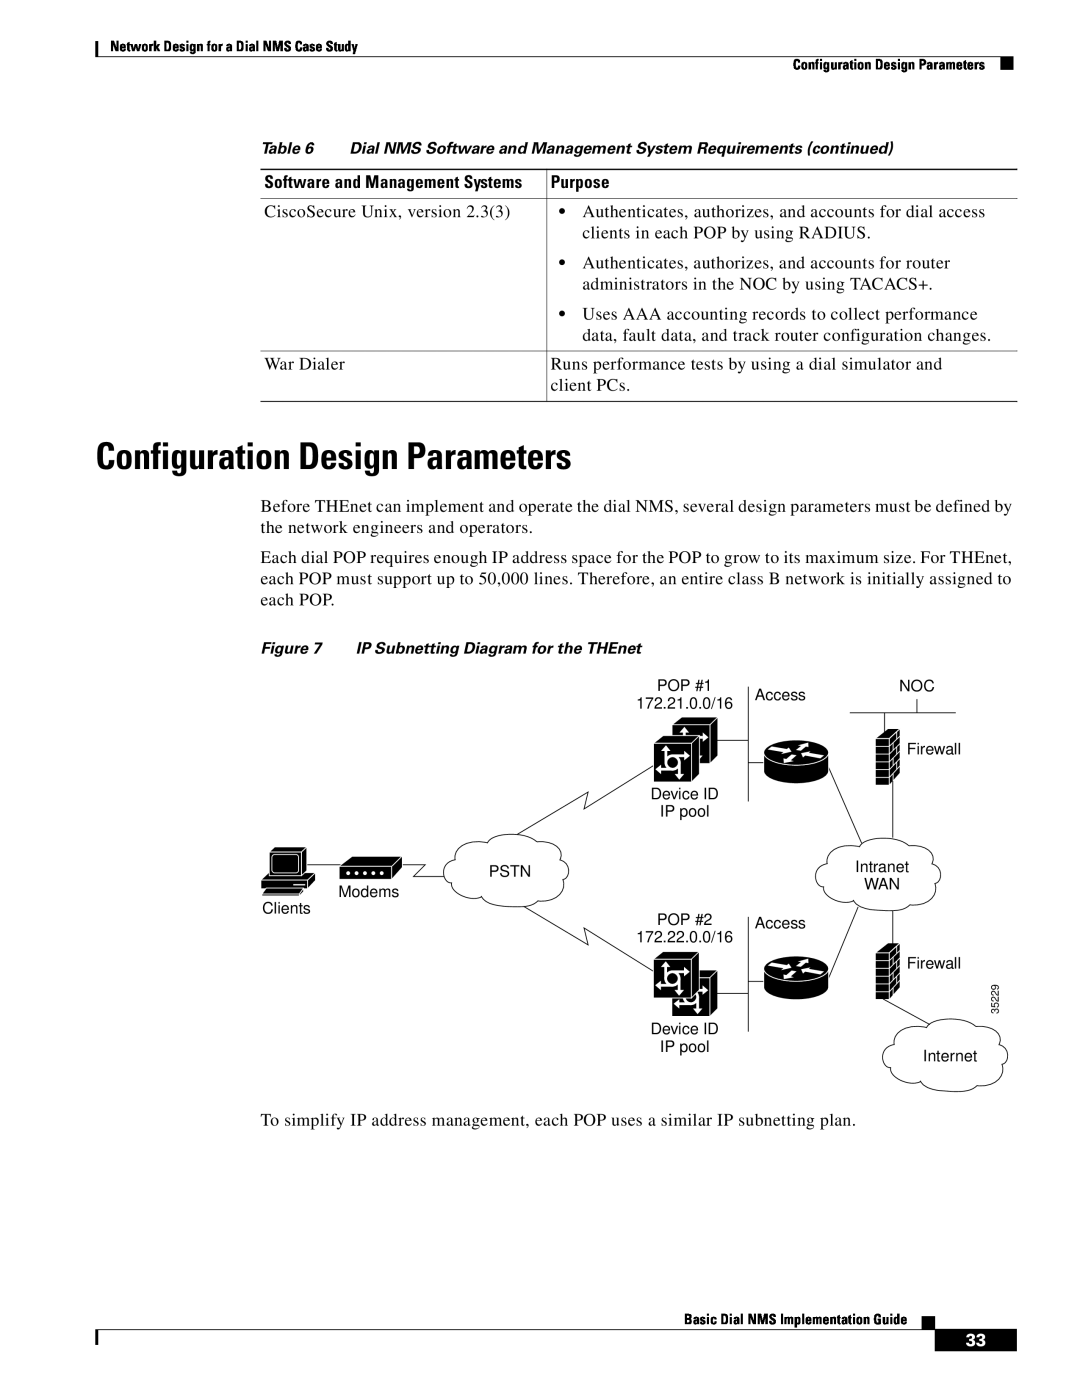 Cisco Systems Dial NMS manual Configuration Design Parameters 